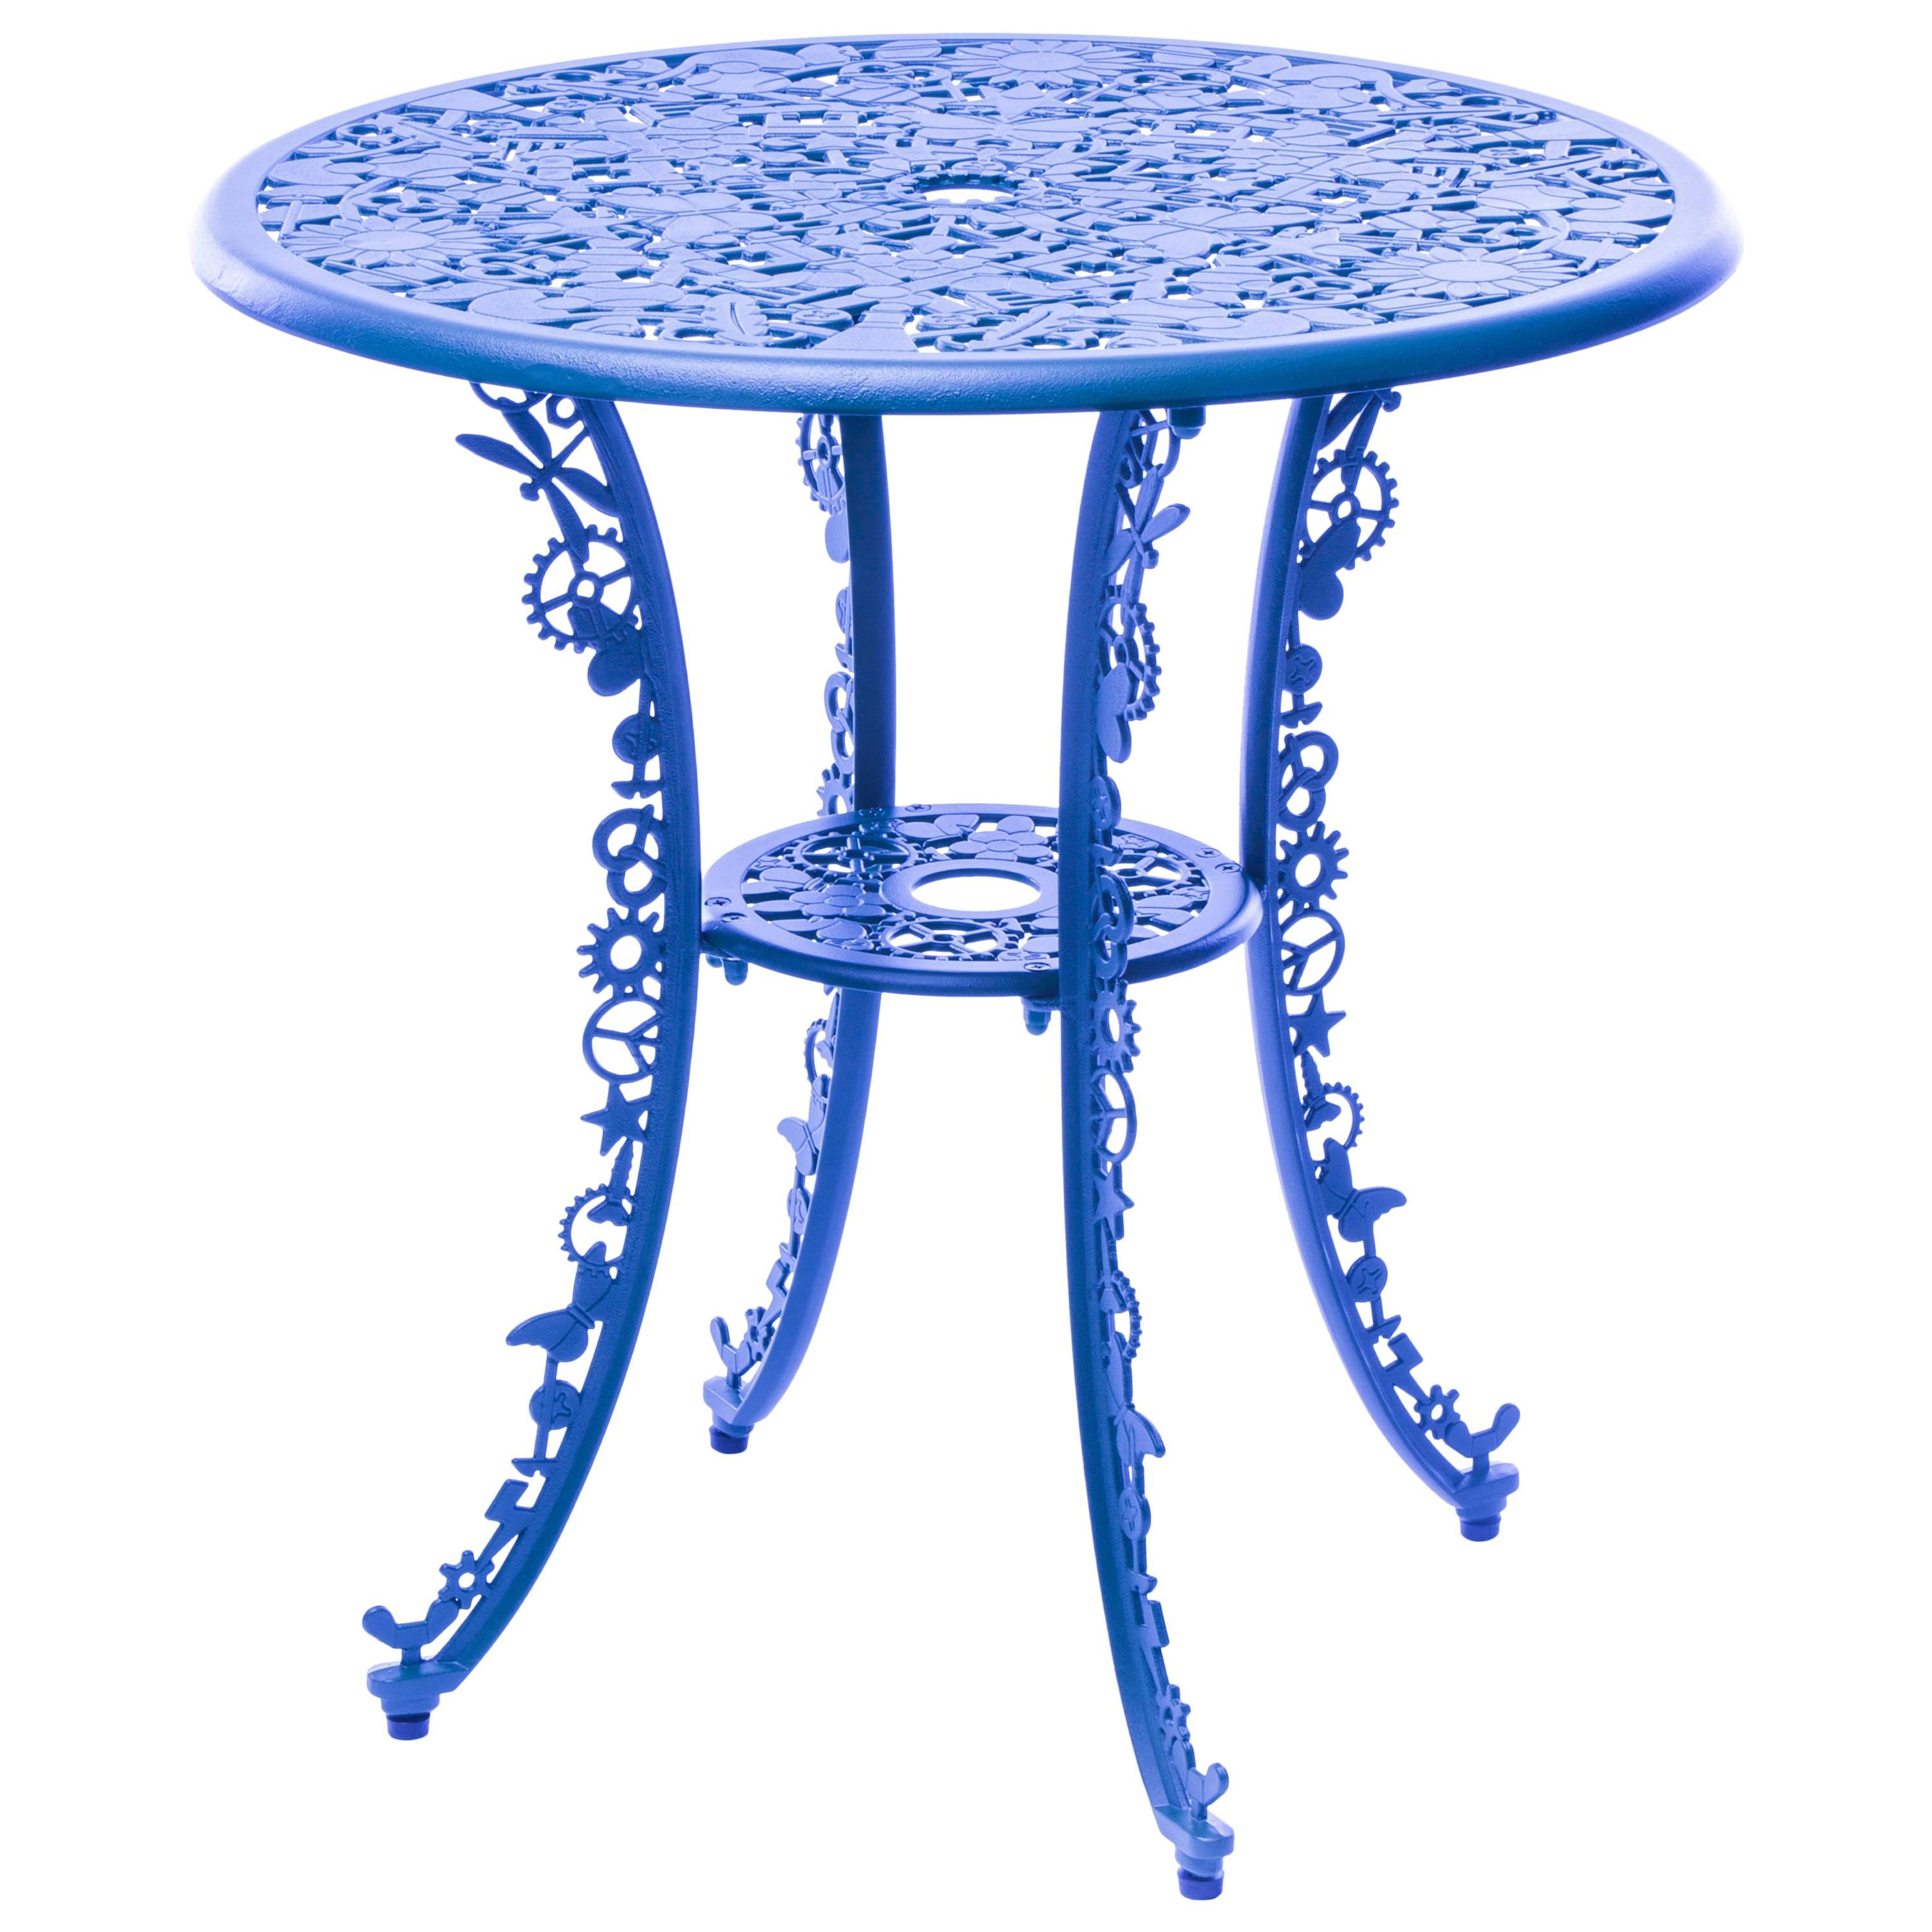 Aluminum Table "Industry Garden Furniture" by Seletti, Sky Blue For Sale